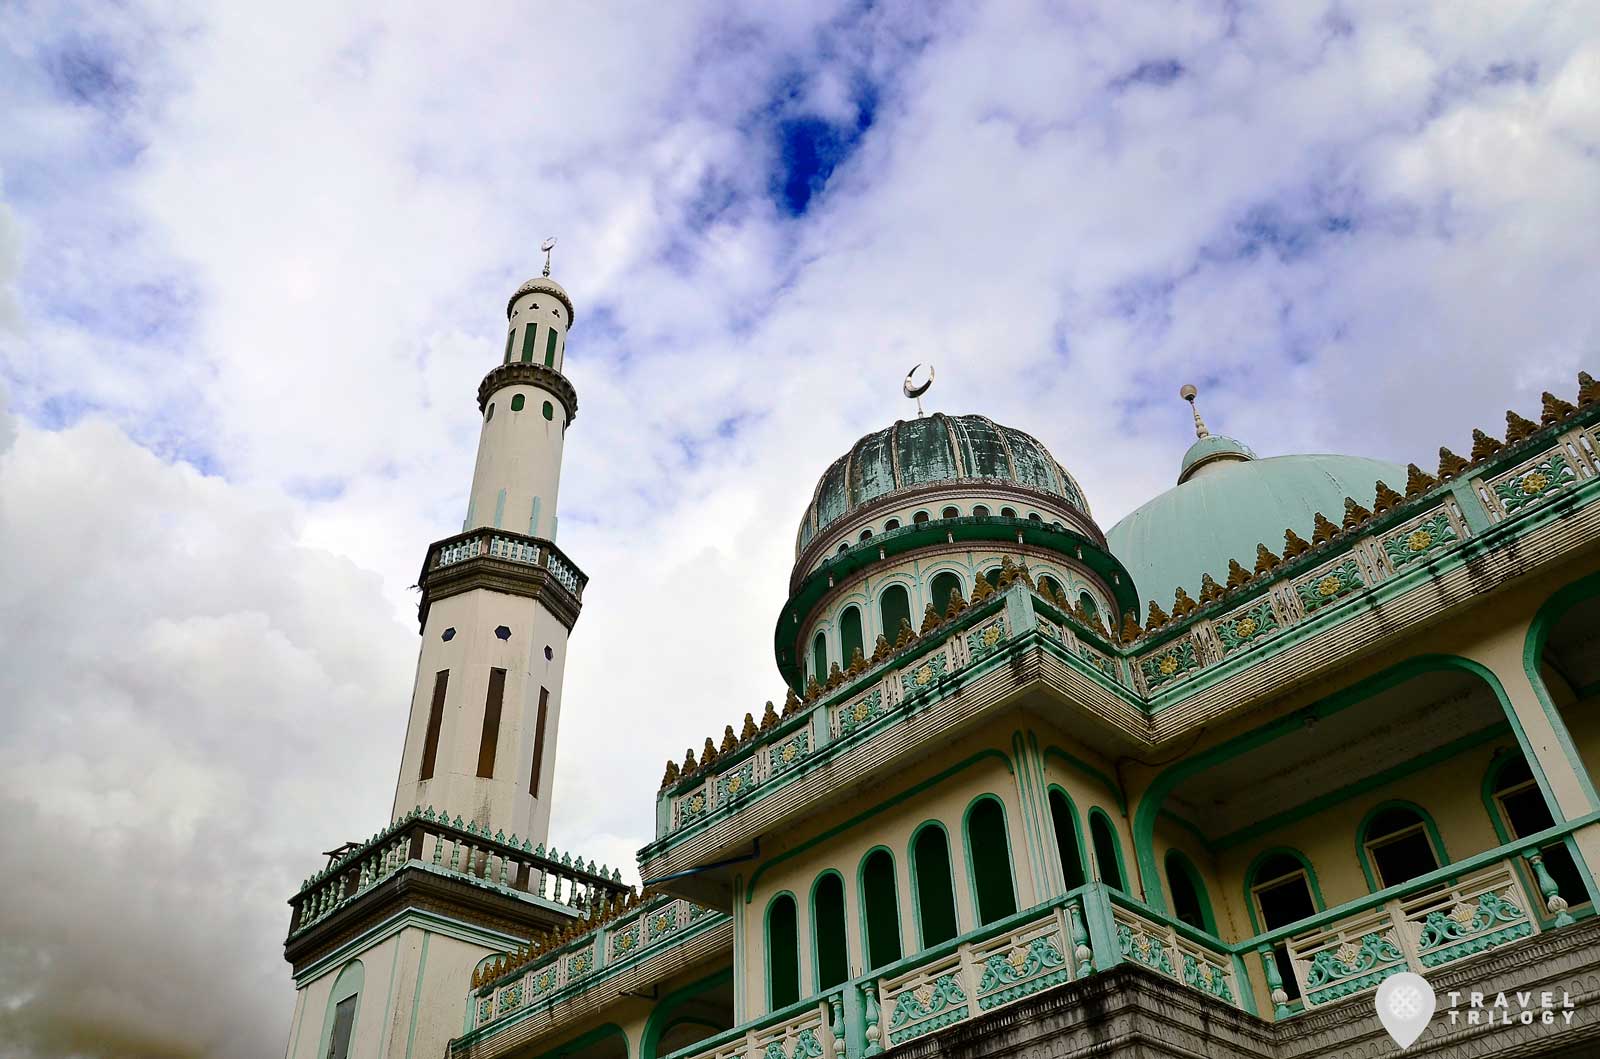 mosques in the philippines